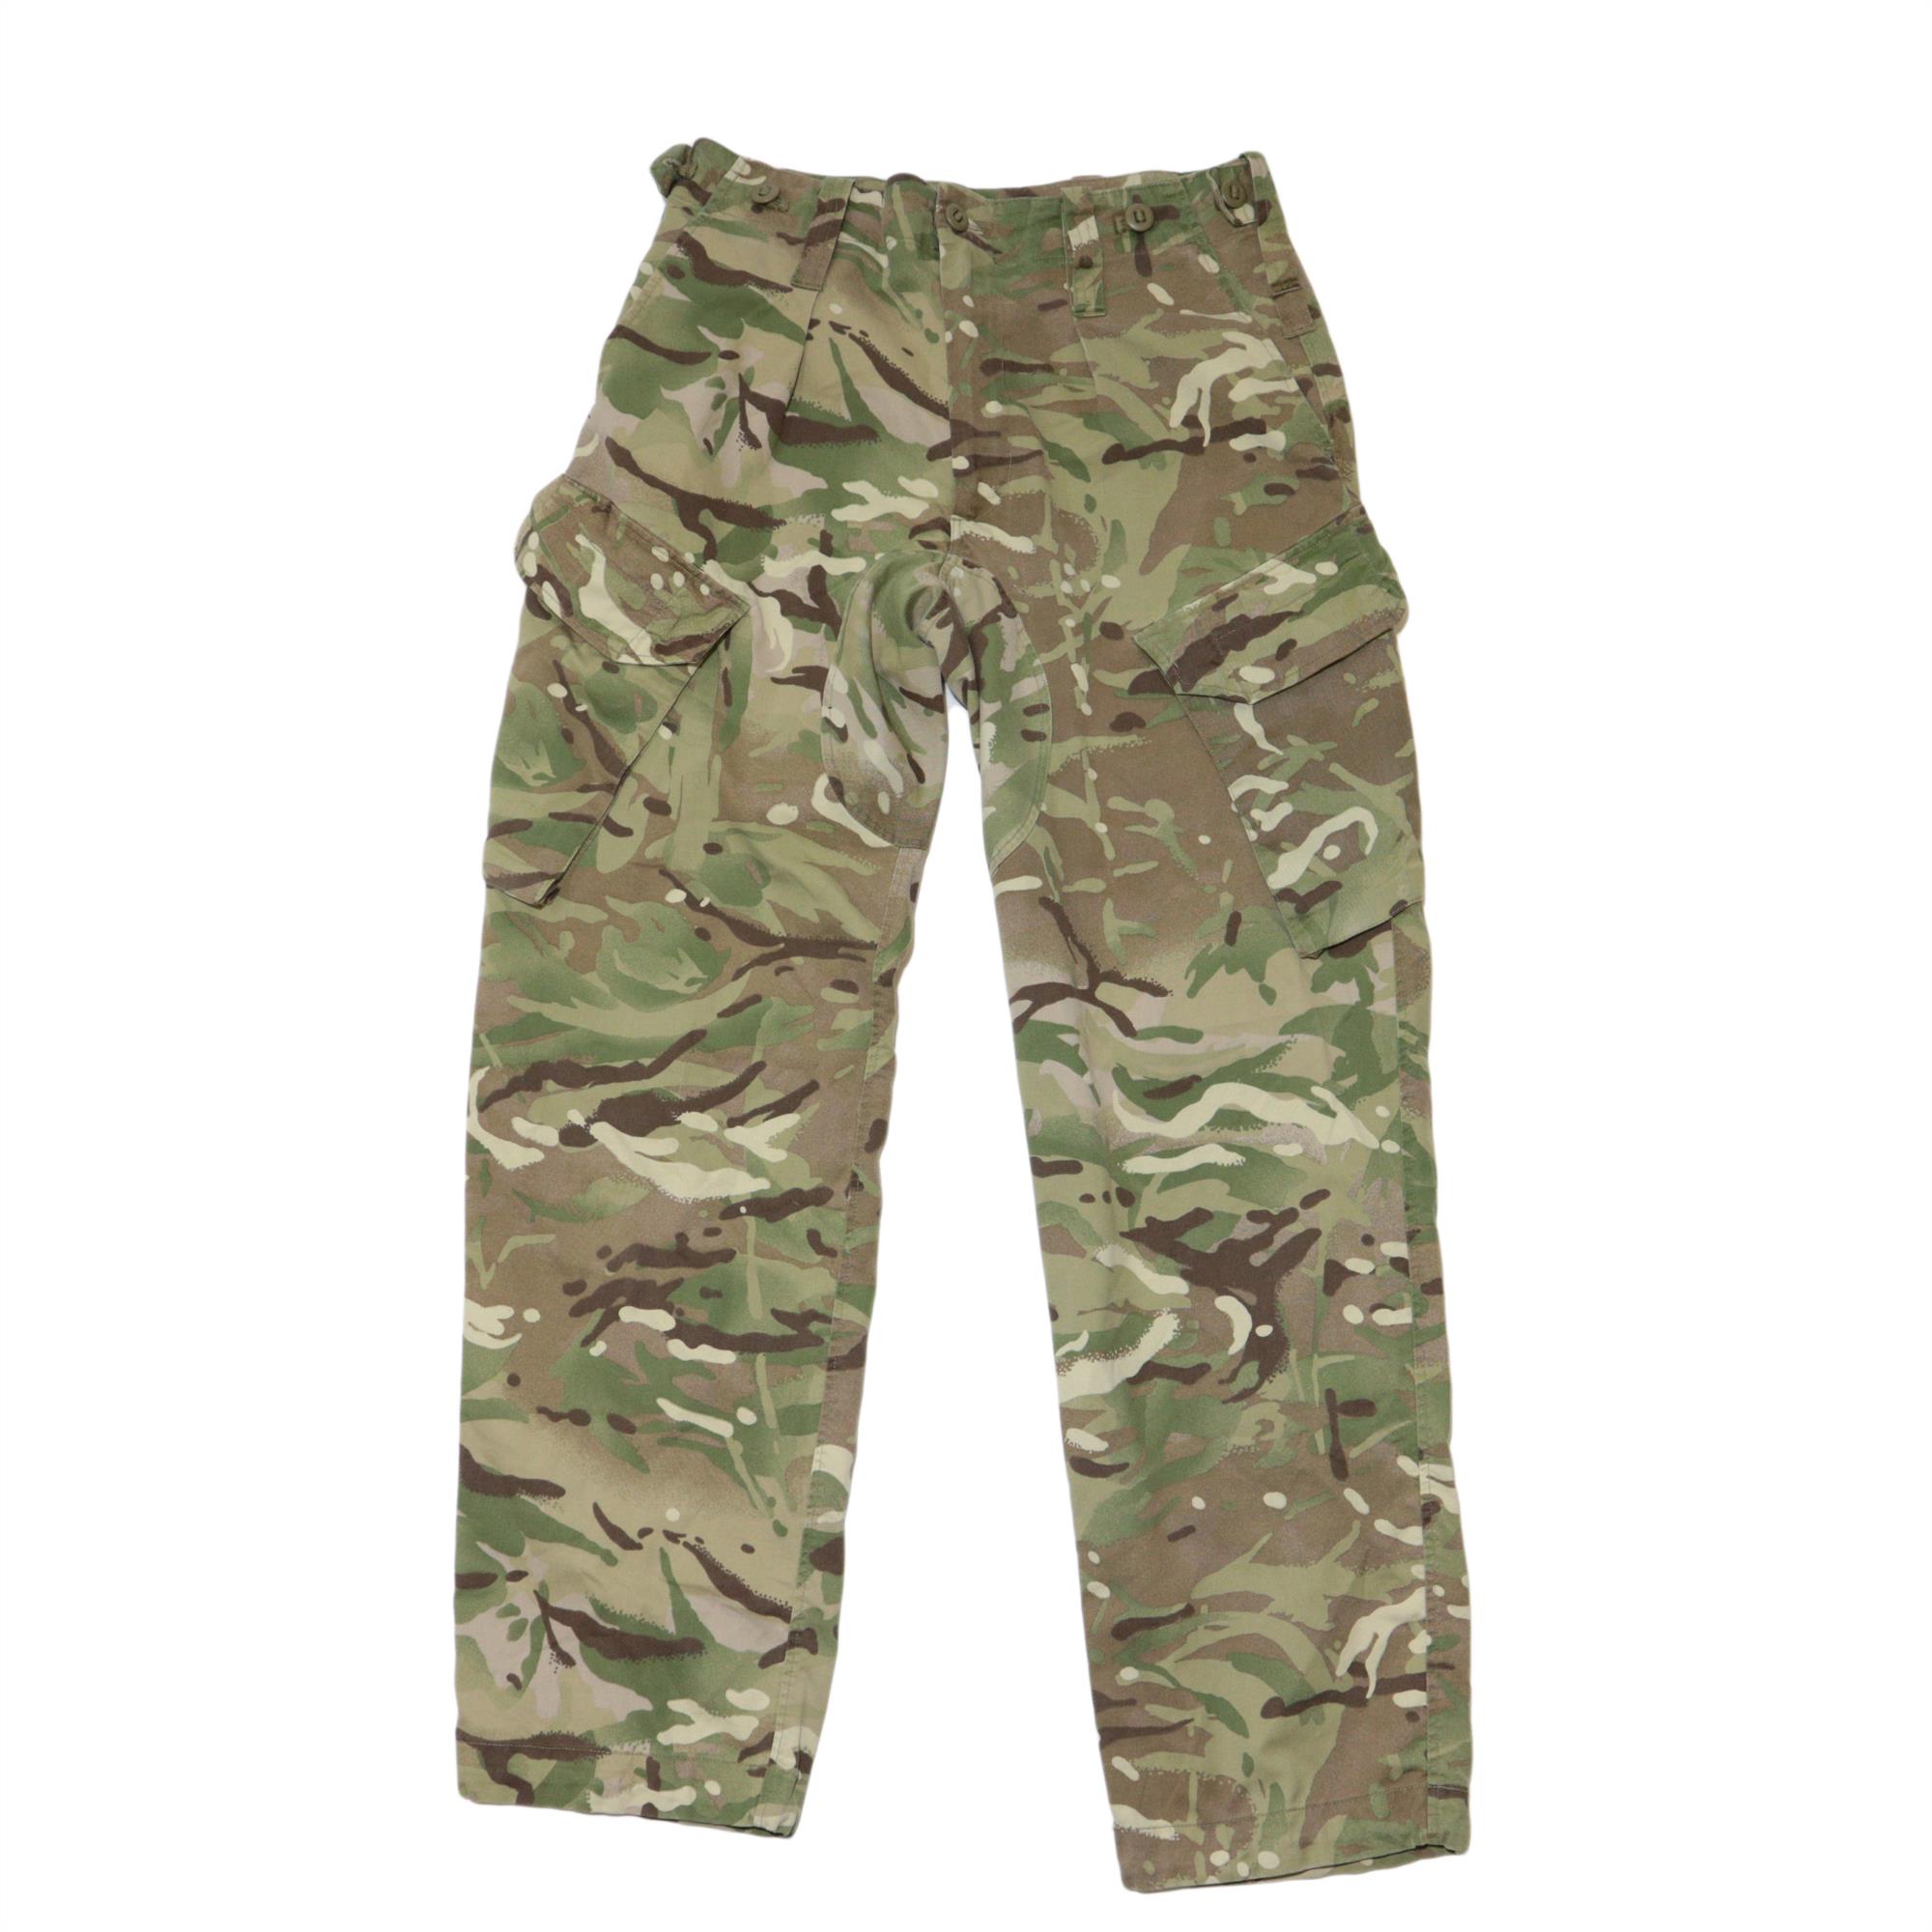 Genuine British Army Surplus Graded MTP Insect Repellent Trousers ...